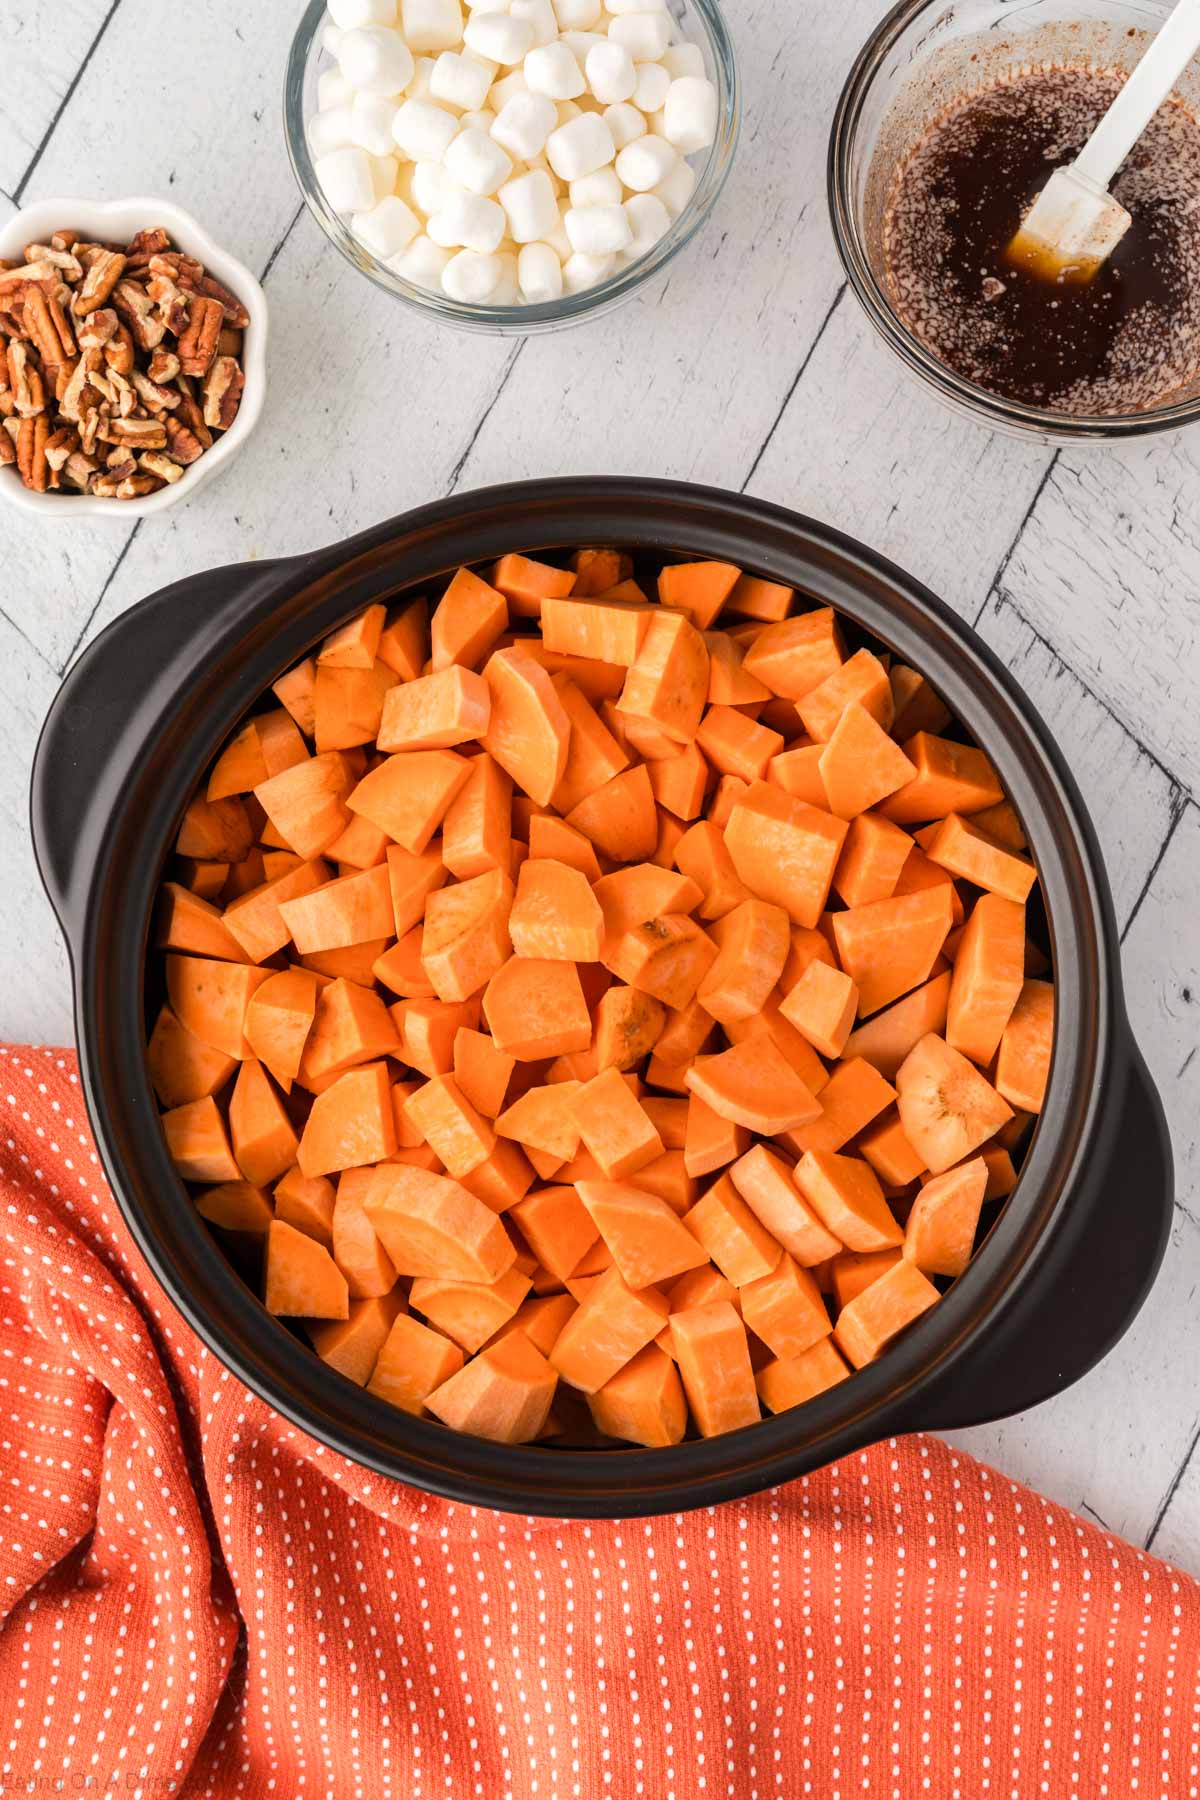 The diced sweet potatoes placed in a slow cooker.  